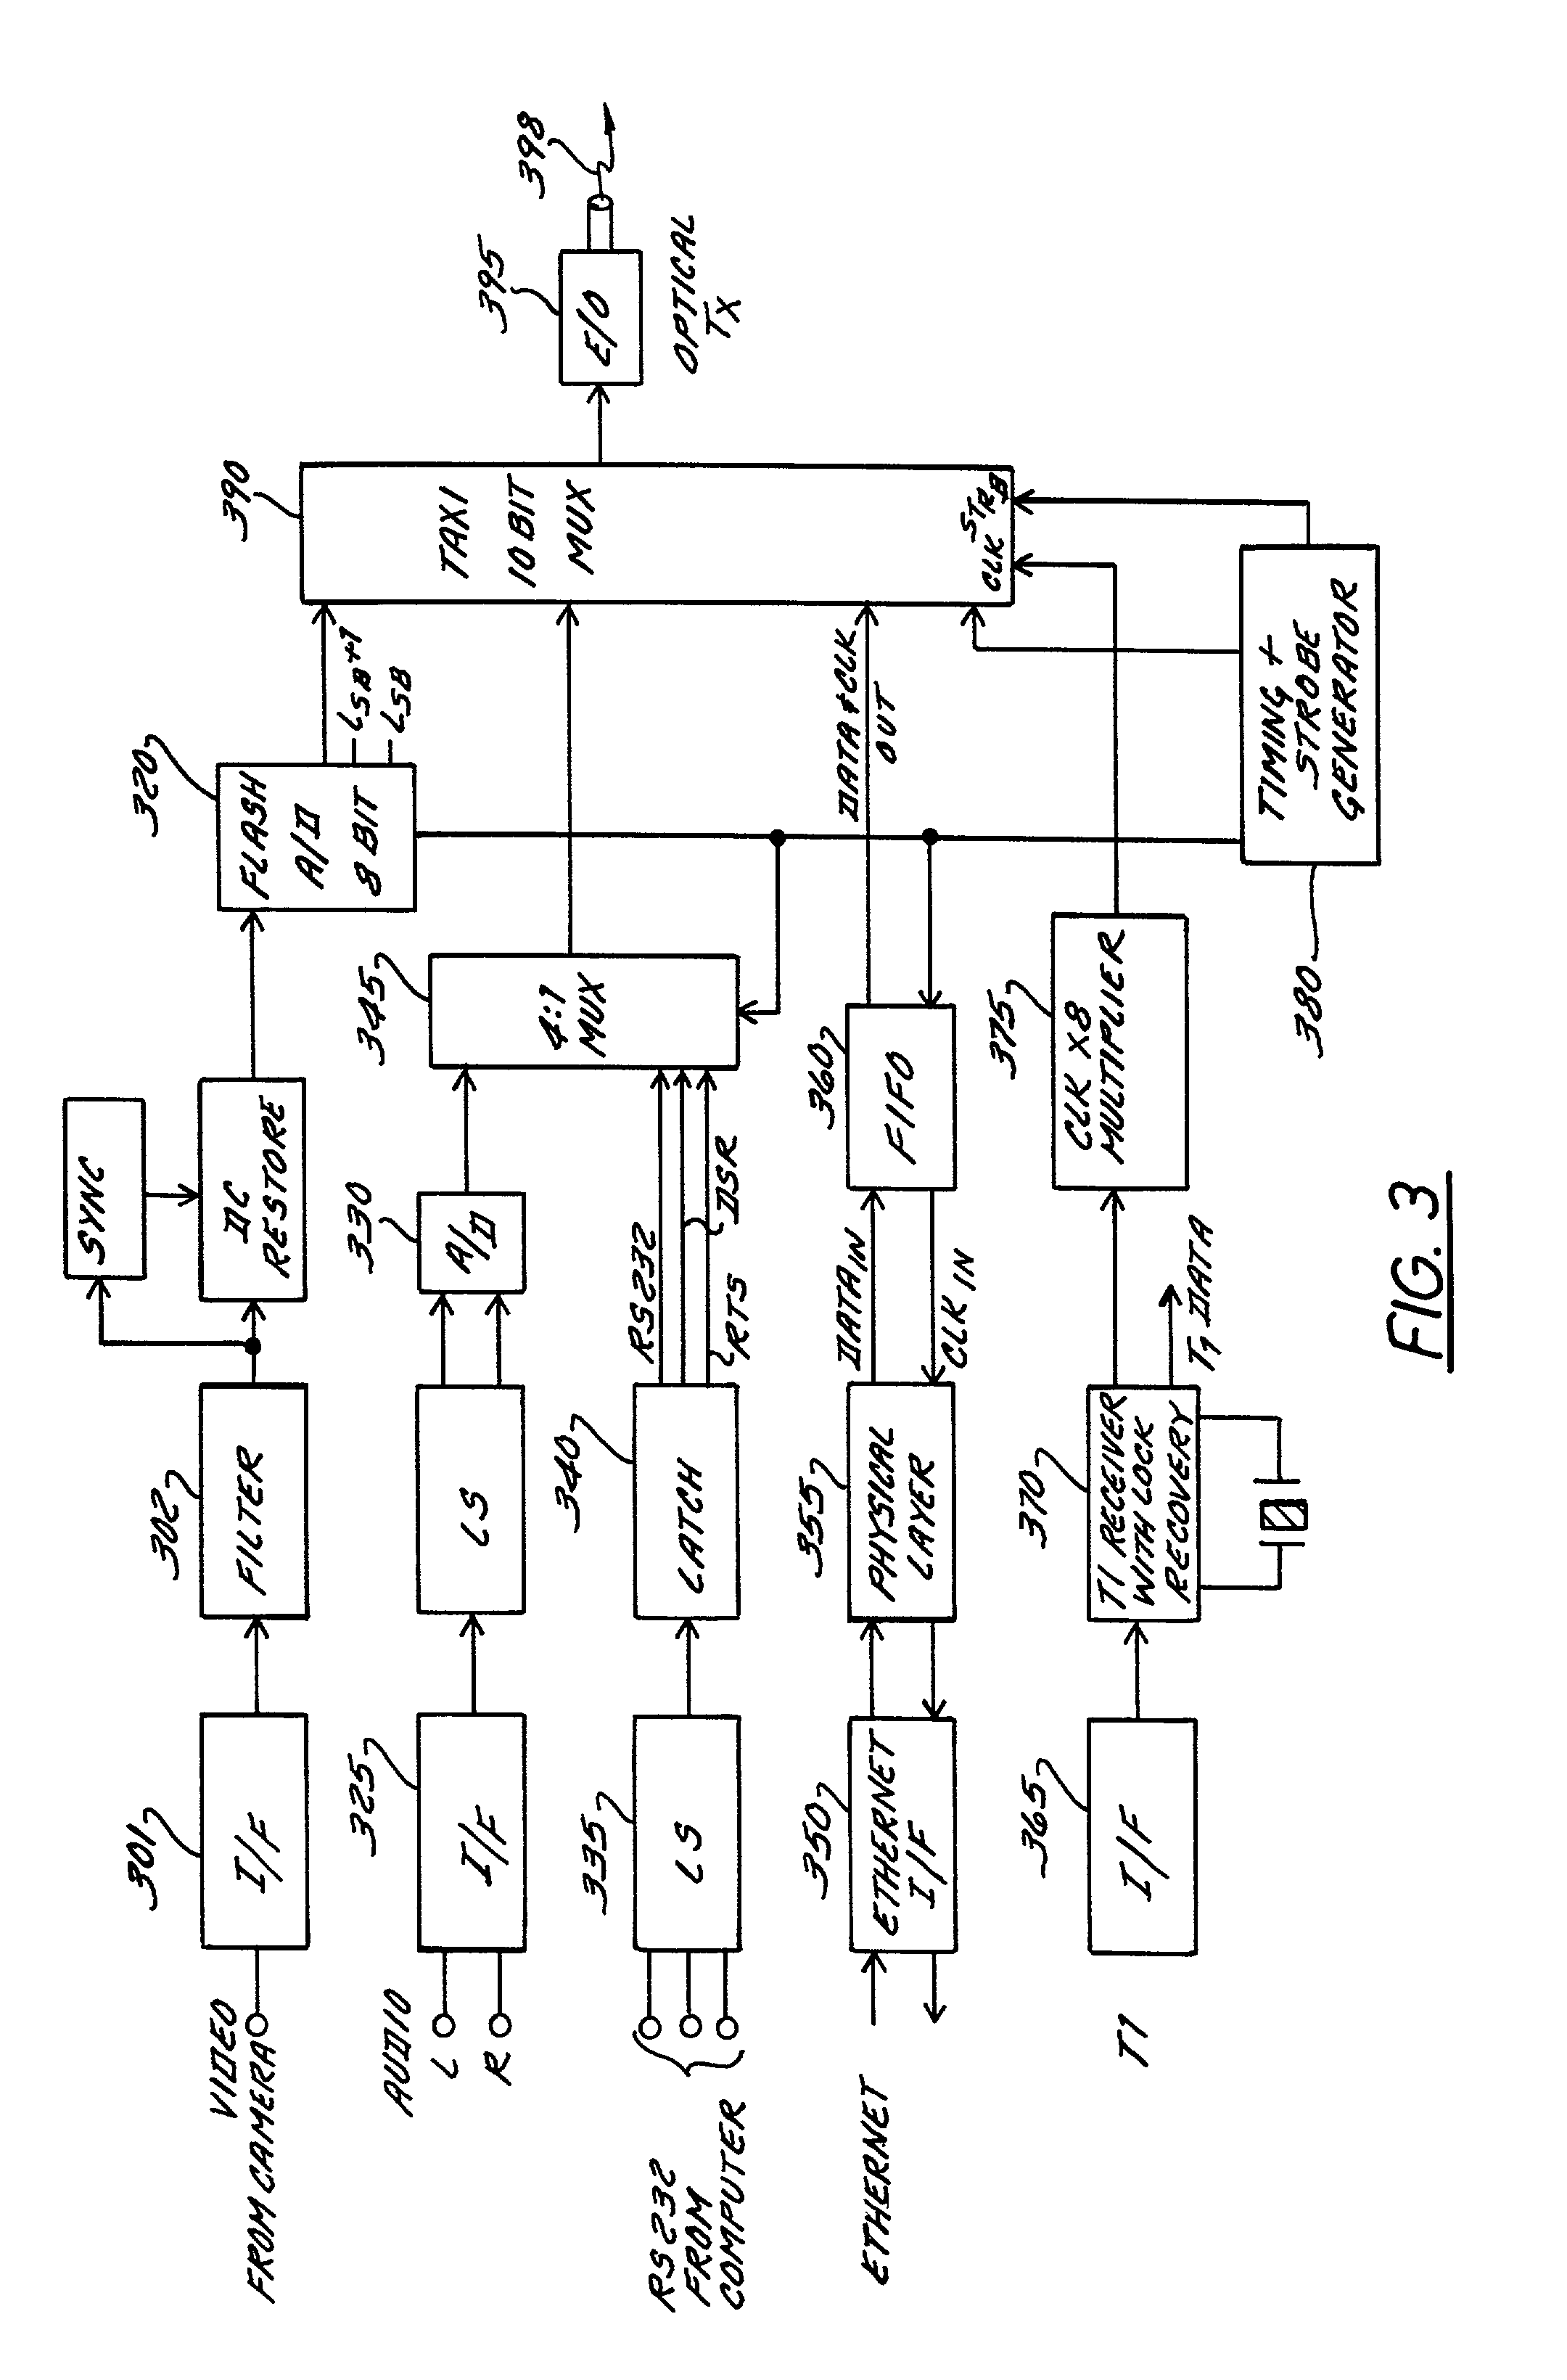 Metropolitan area network switching system and method of operation thereof